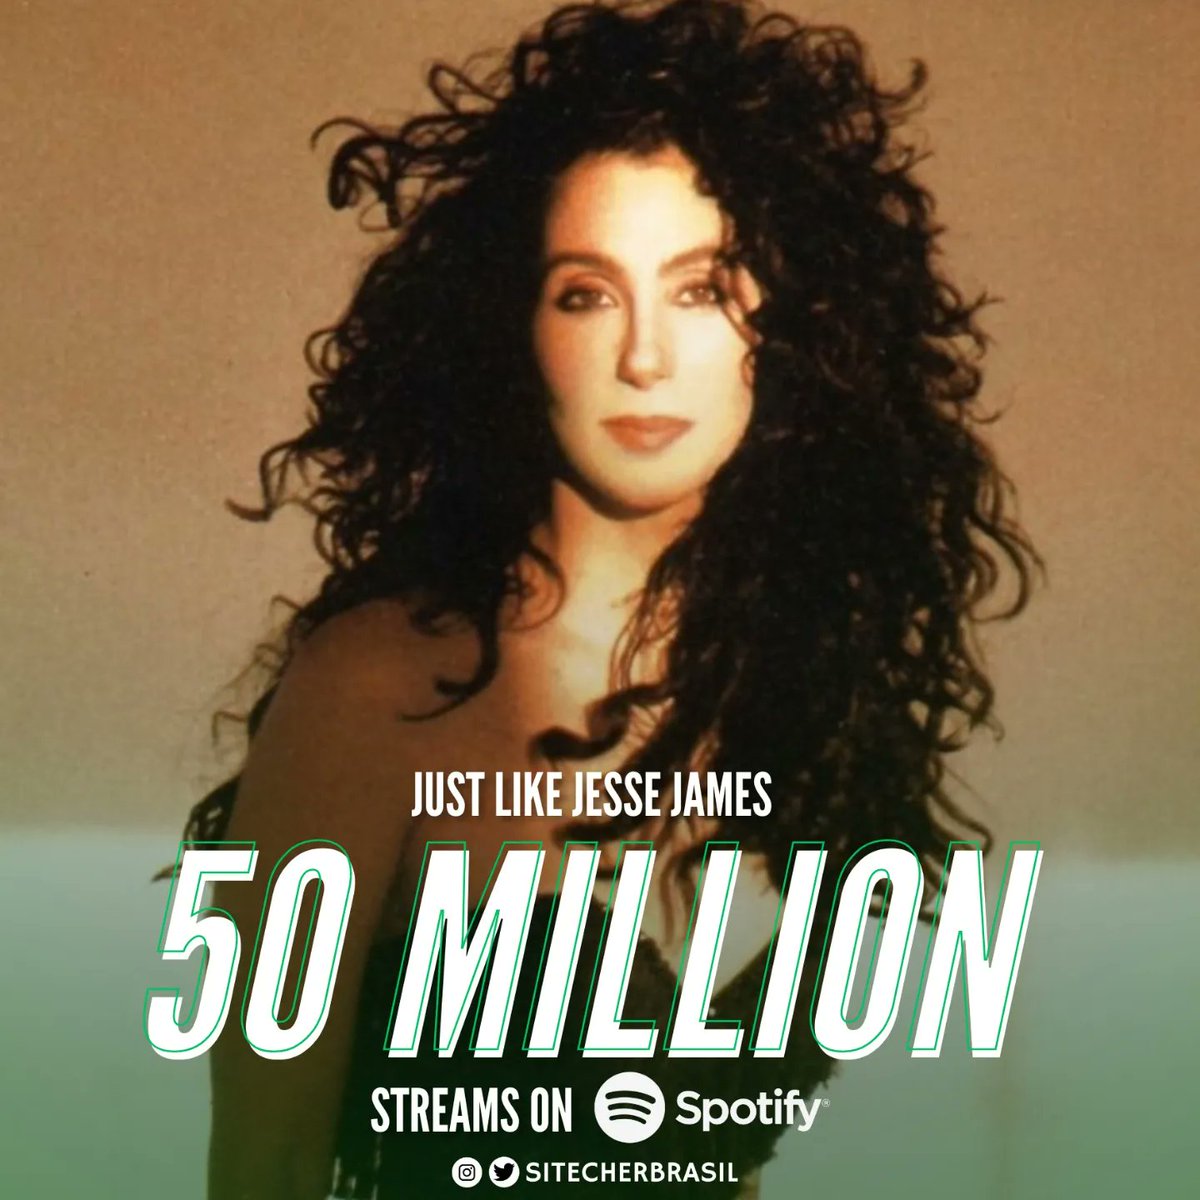 ✨ Last but not least, 'Just Like Jesse James' has reached 50 million streams on the platform (only the 9th song of her catalogue to surpass this mark)